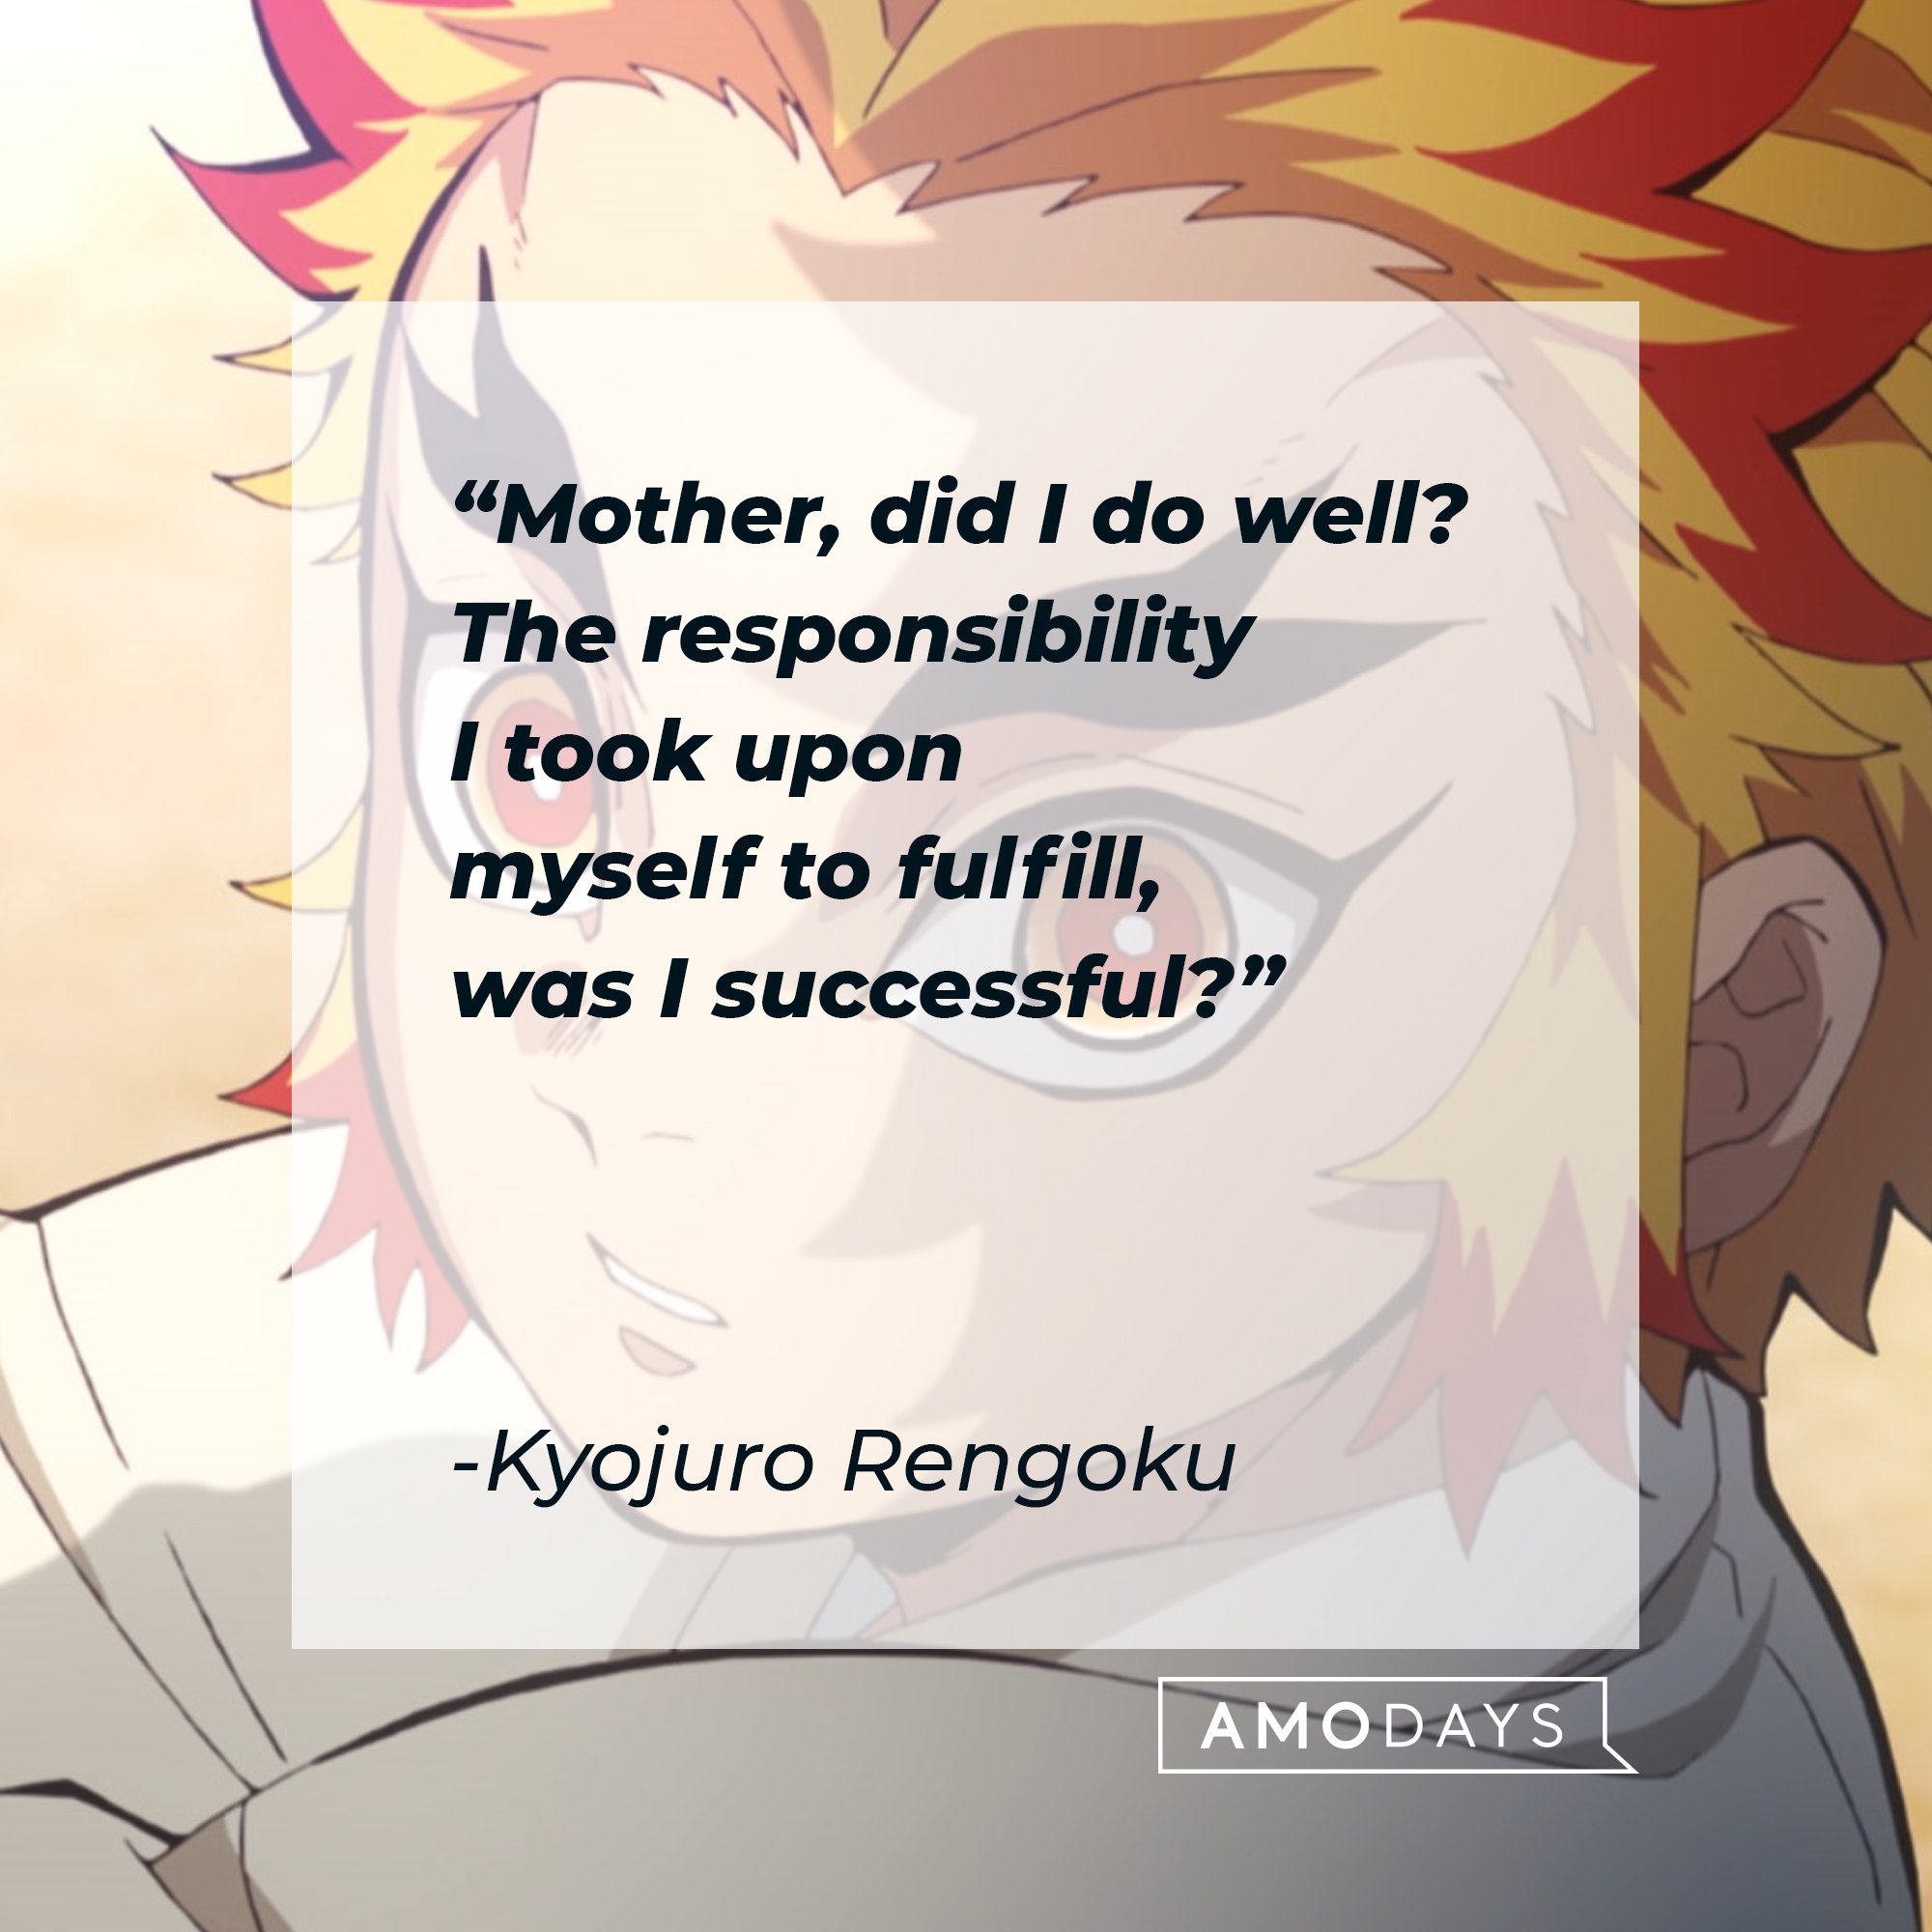 Kyojuro Rengoku’s quote: “Mother, did I do well? The responsibility I took upon myself to fulfill, was I successful?” | Image: AmoDays